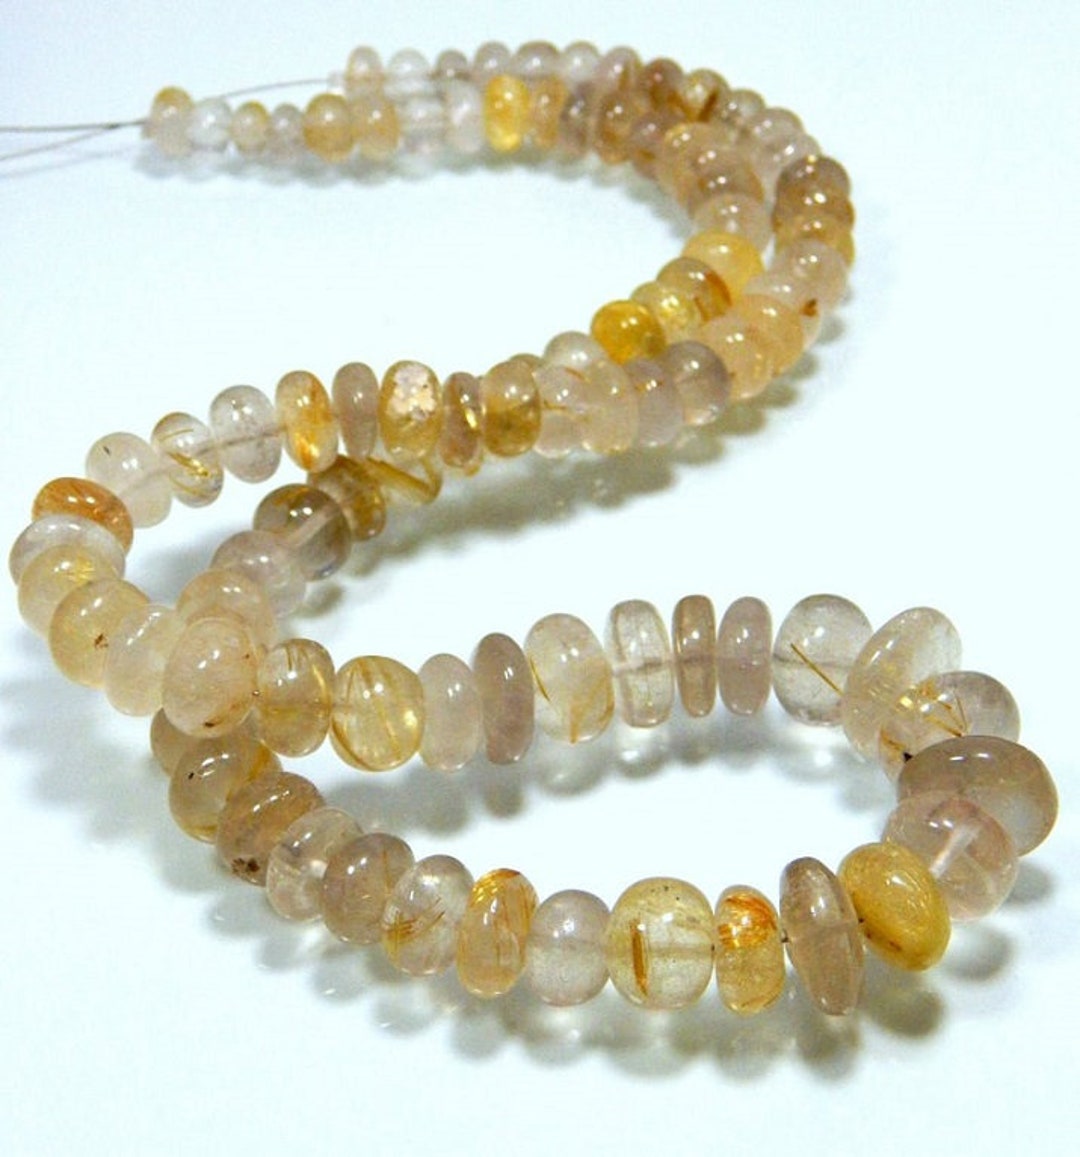 Golden Rutile Smooth Beads Rondelle Shape 6x12.mm Approx - Etsy